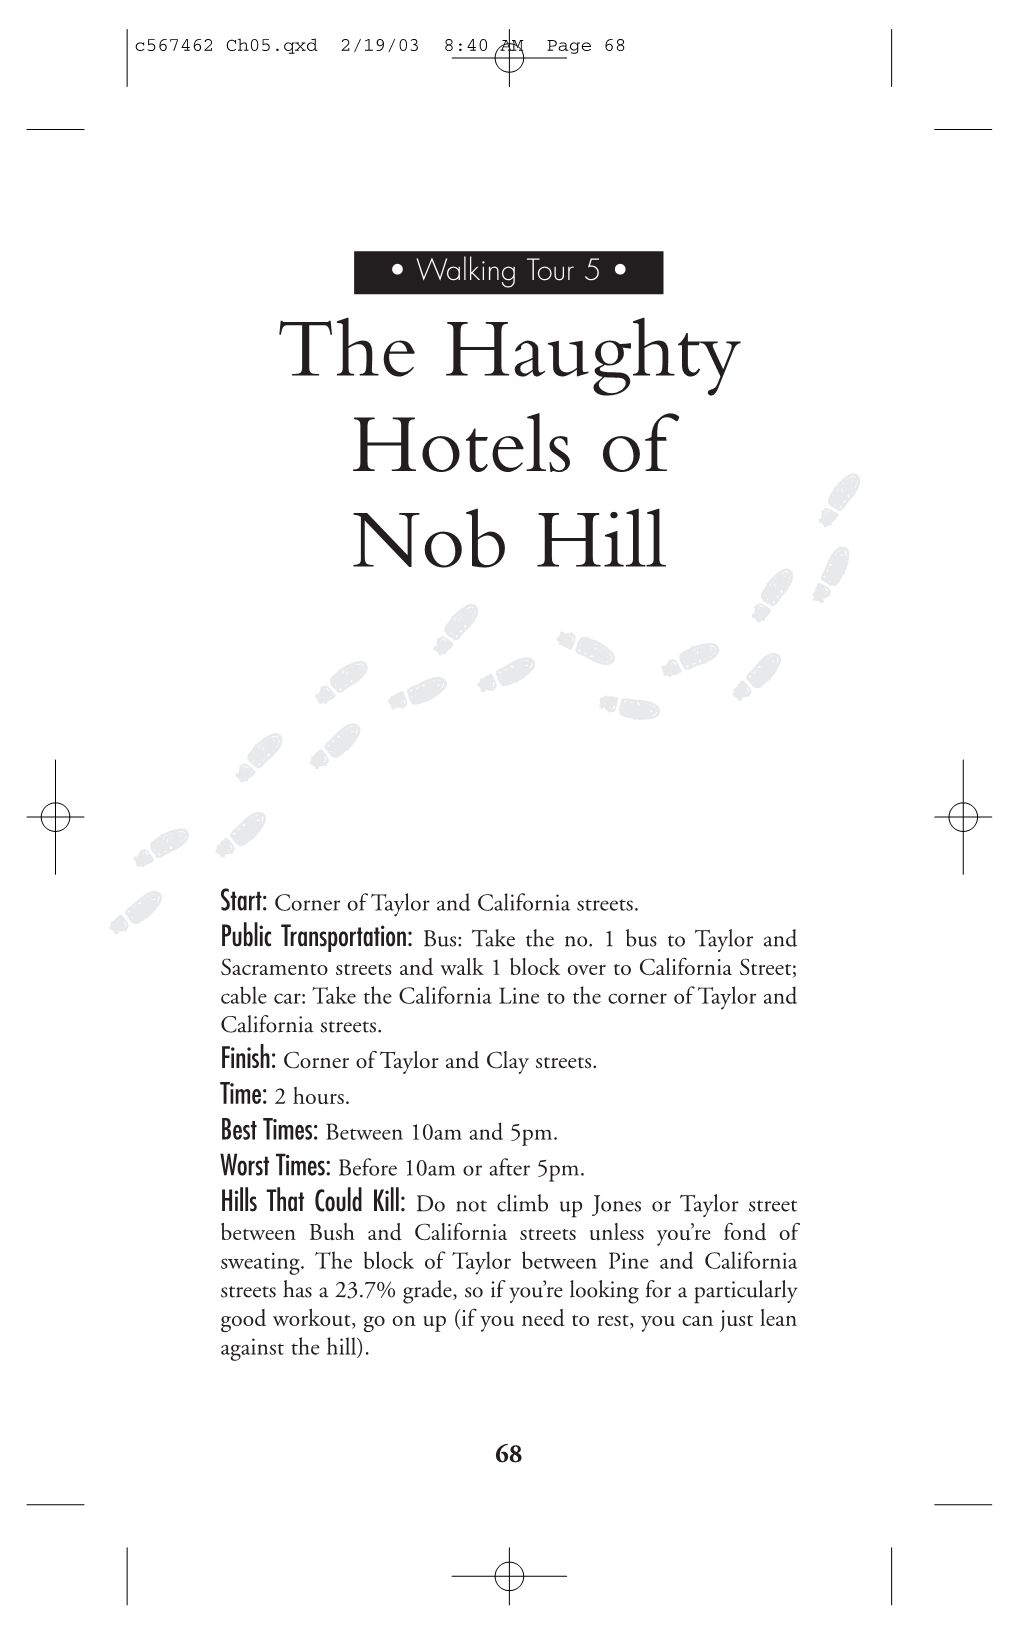 The Haughty Hotels of Nob Hill